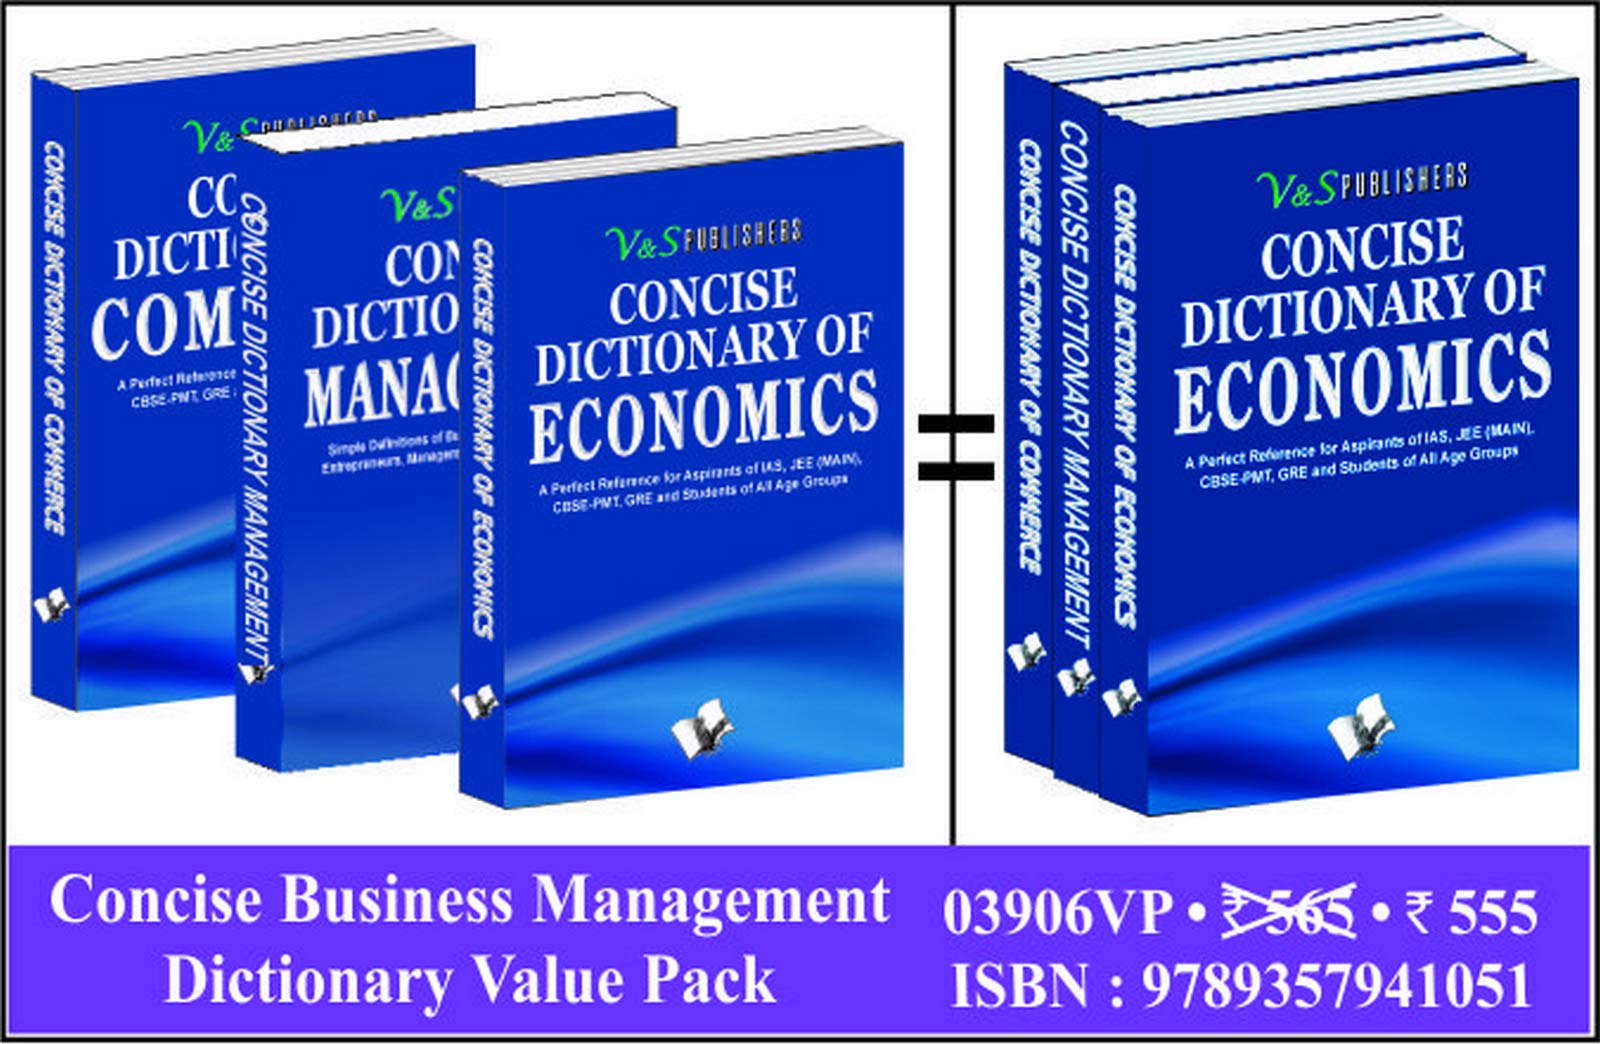 Concise Business Management Dictionary Value Pack